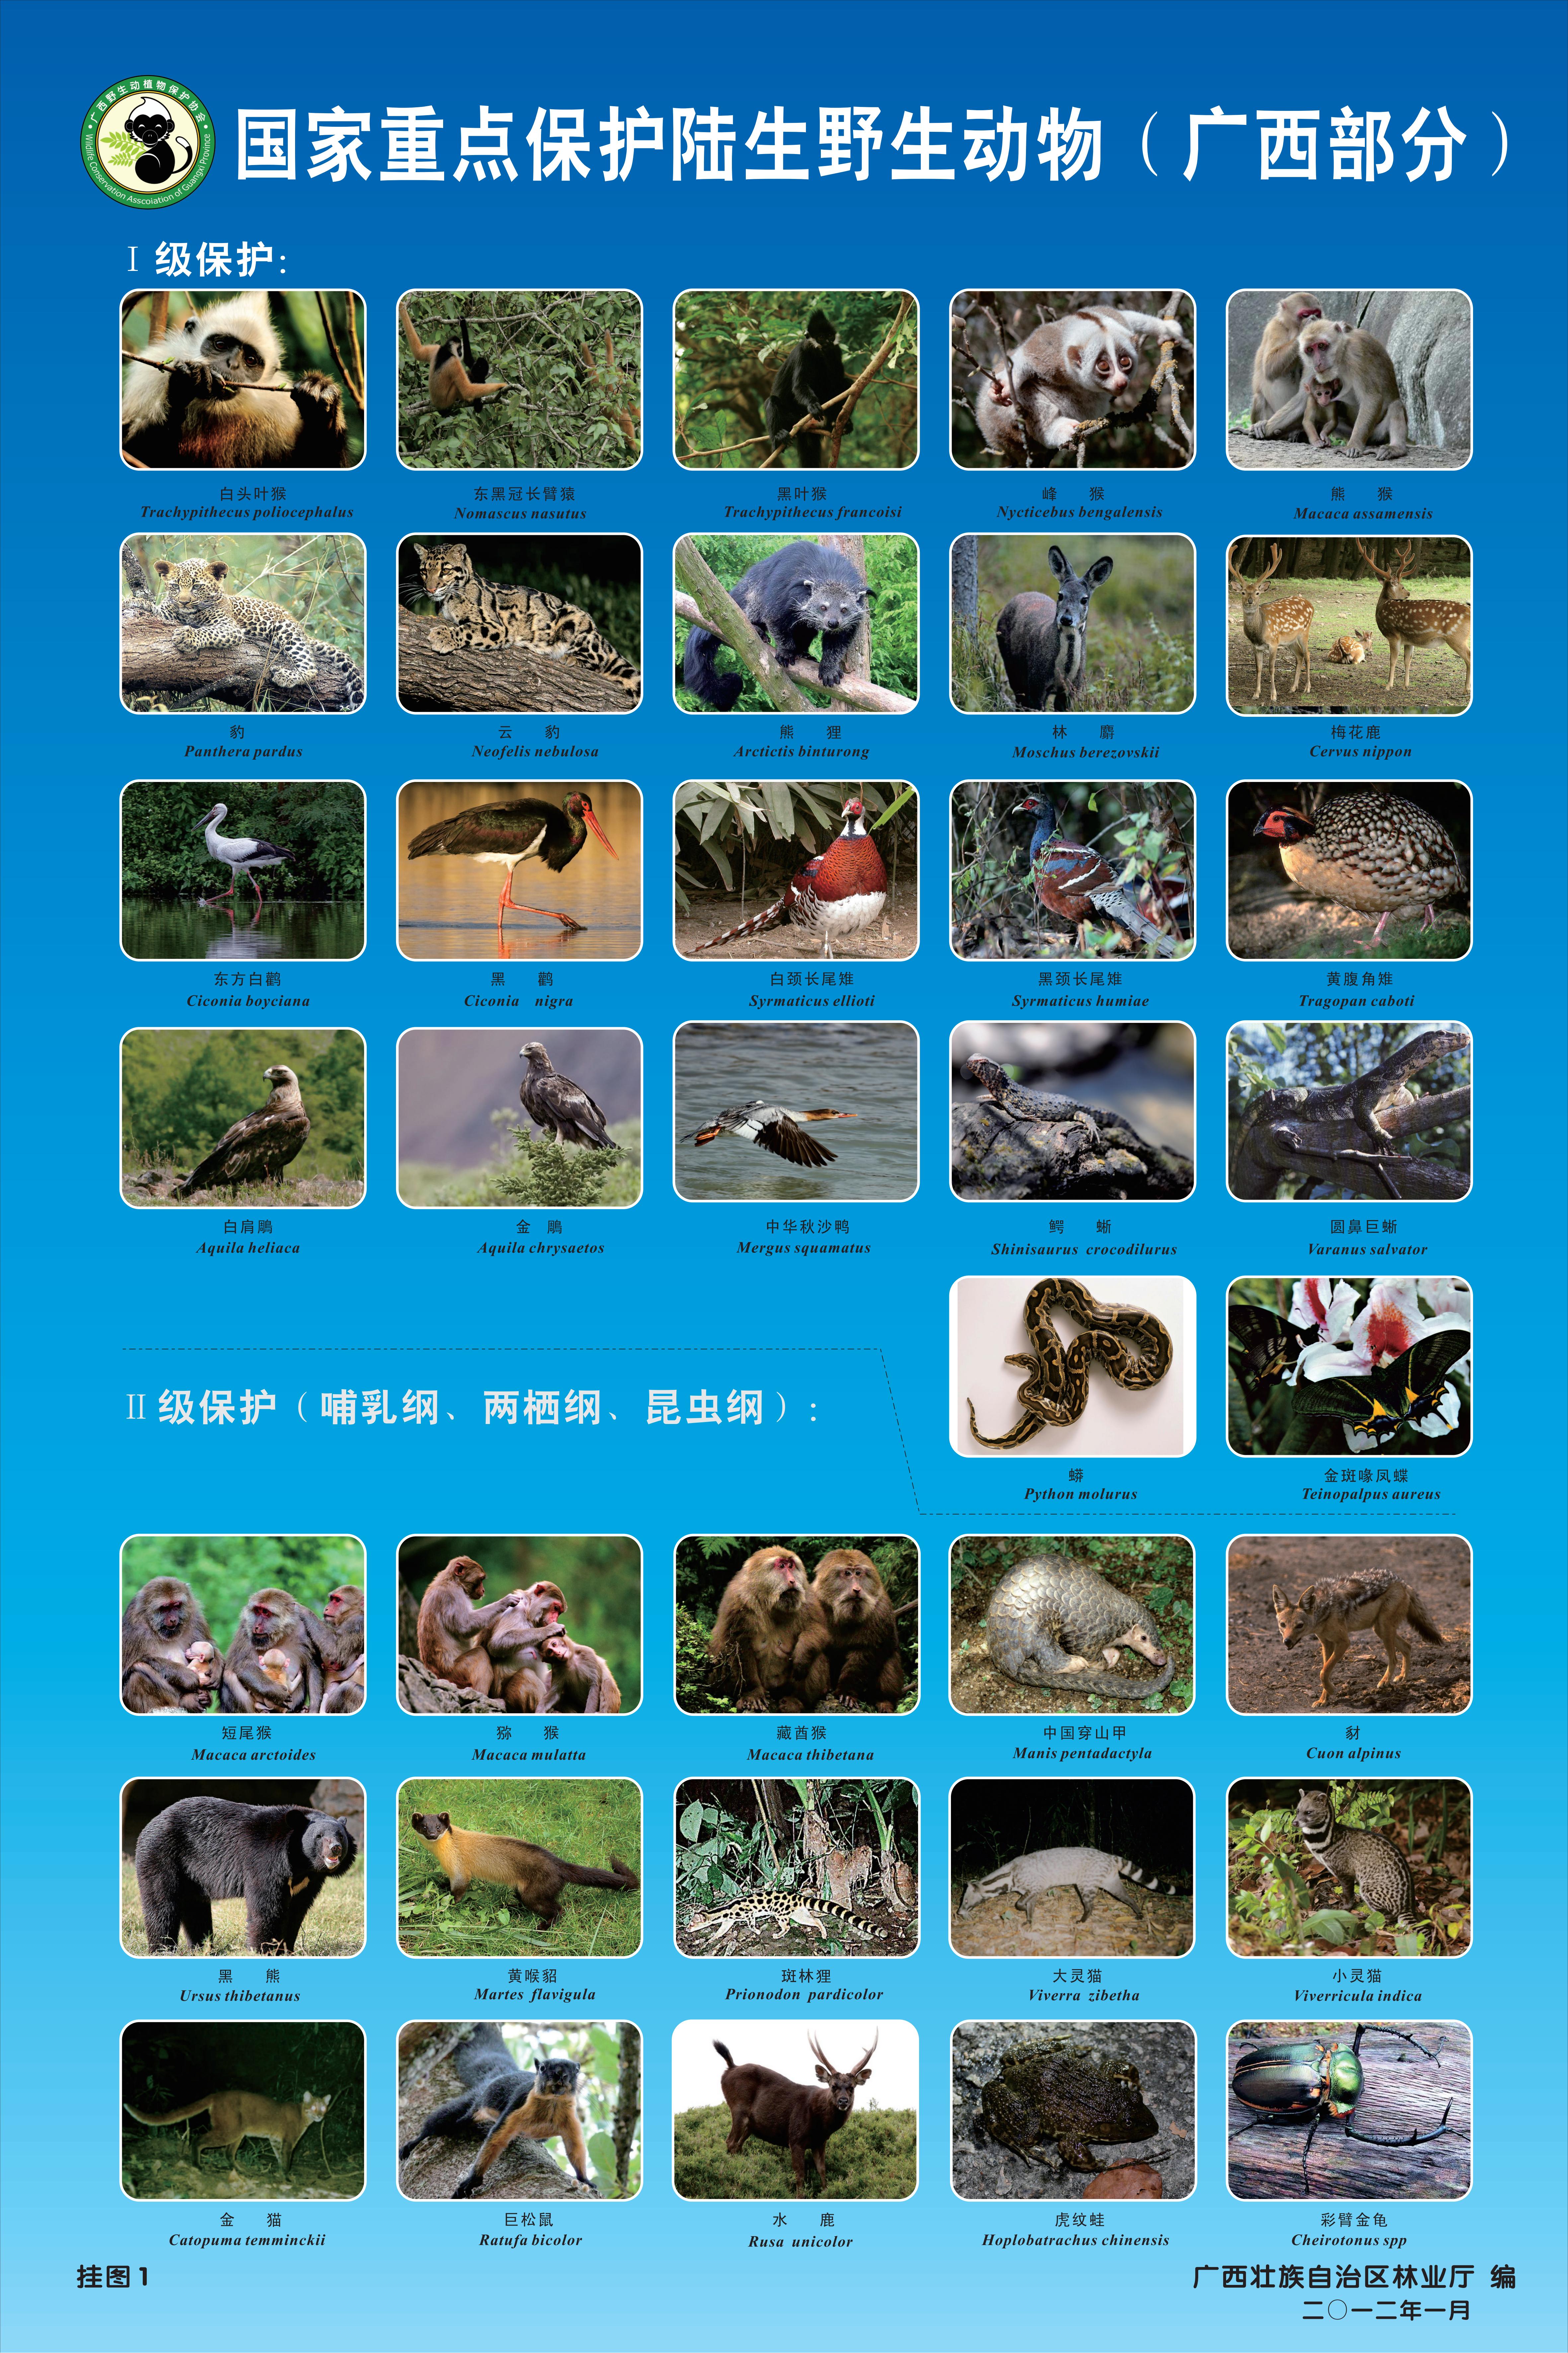 Look!Some national key protected terrestrial wild animals in Guangxi are  here, let's protect them together. - iNEWS